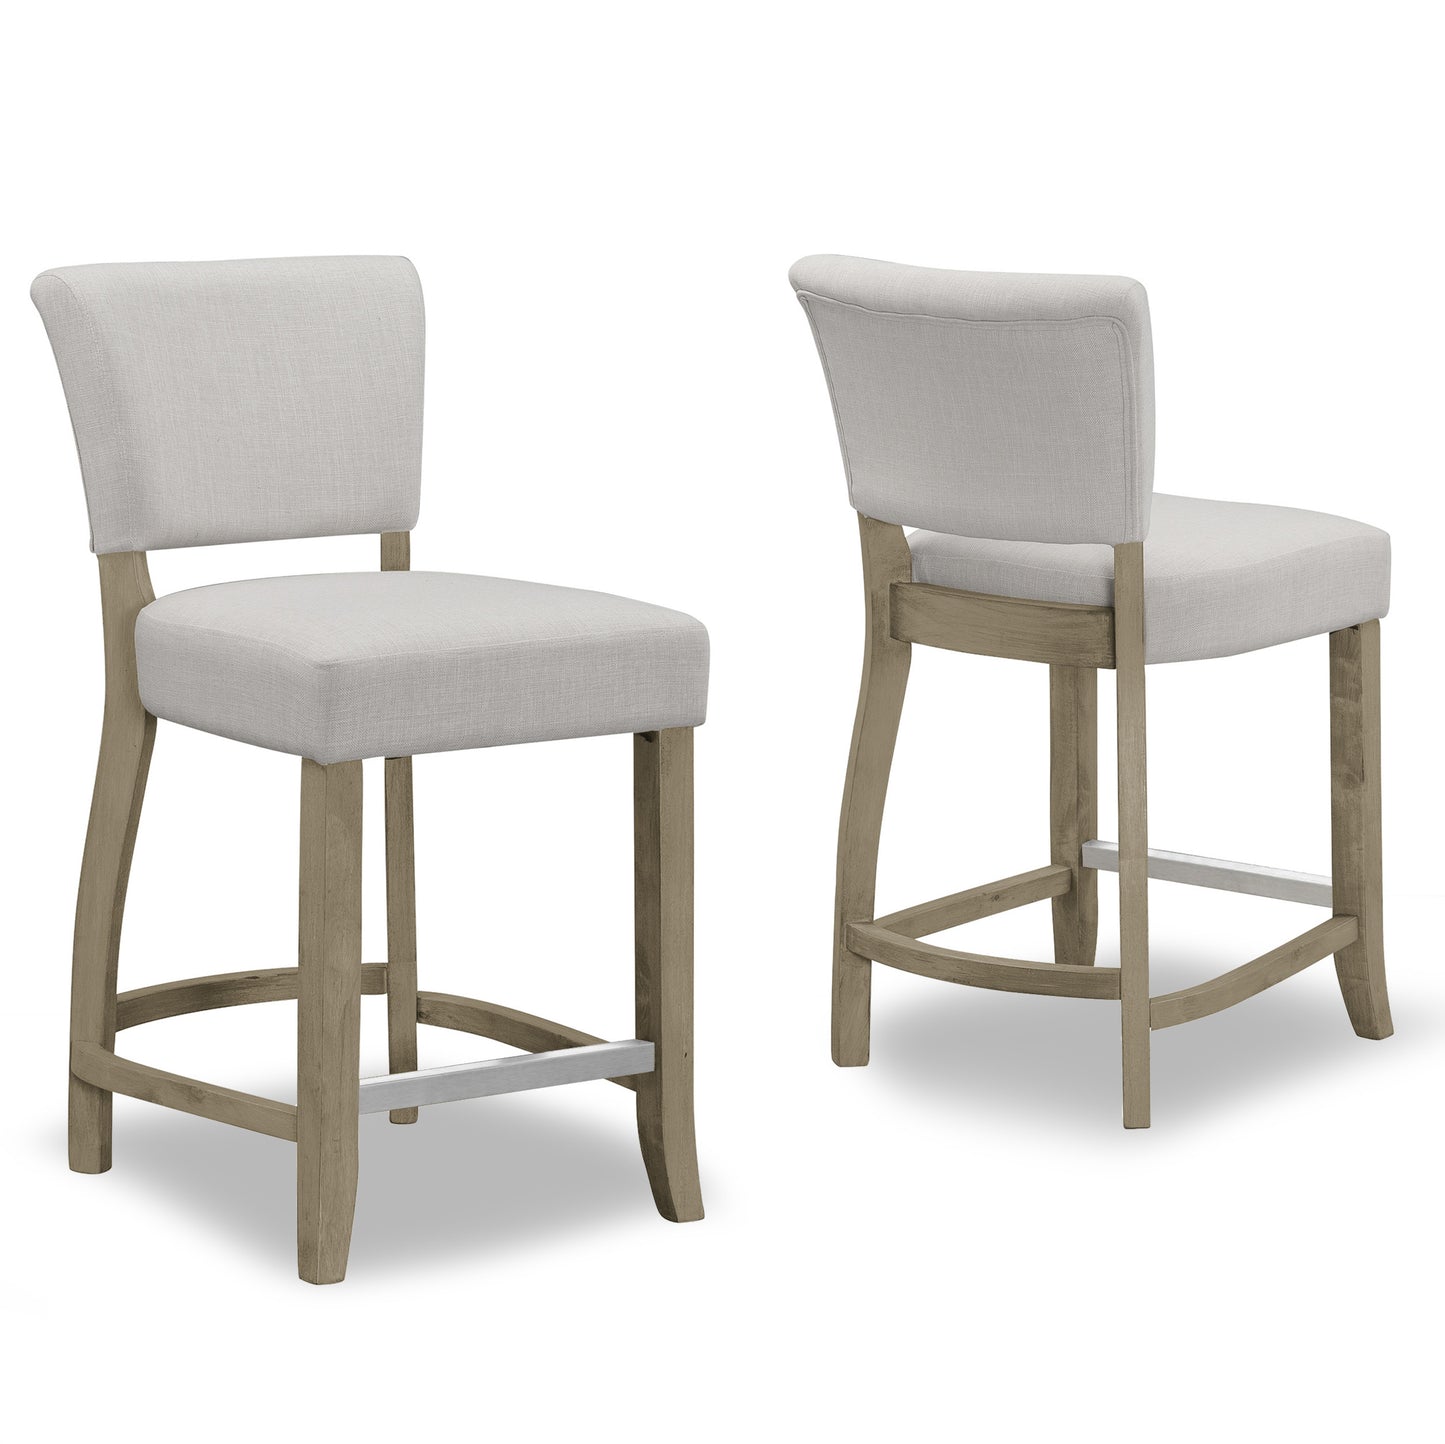 Set of 2 Aleck Beige Fabric Counter Stool with Antique Finish Wood Legs